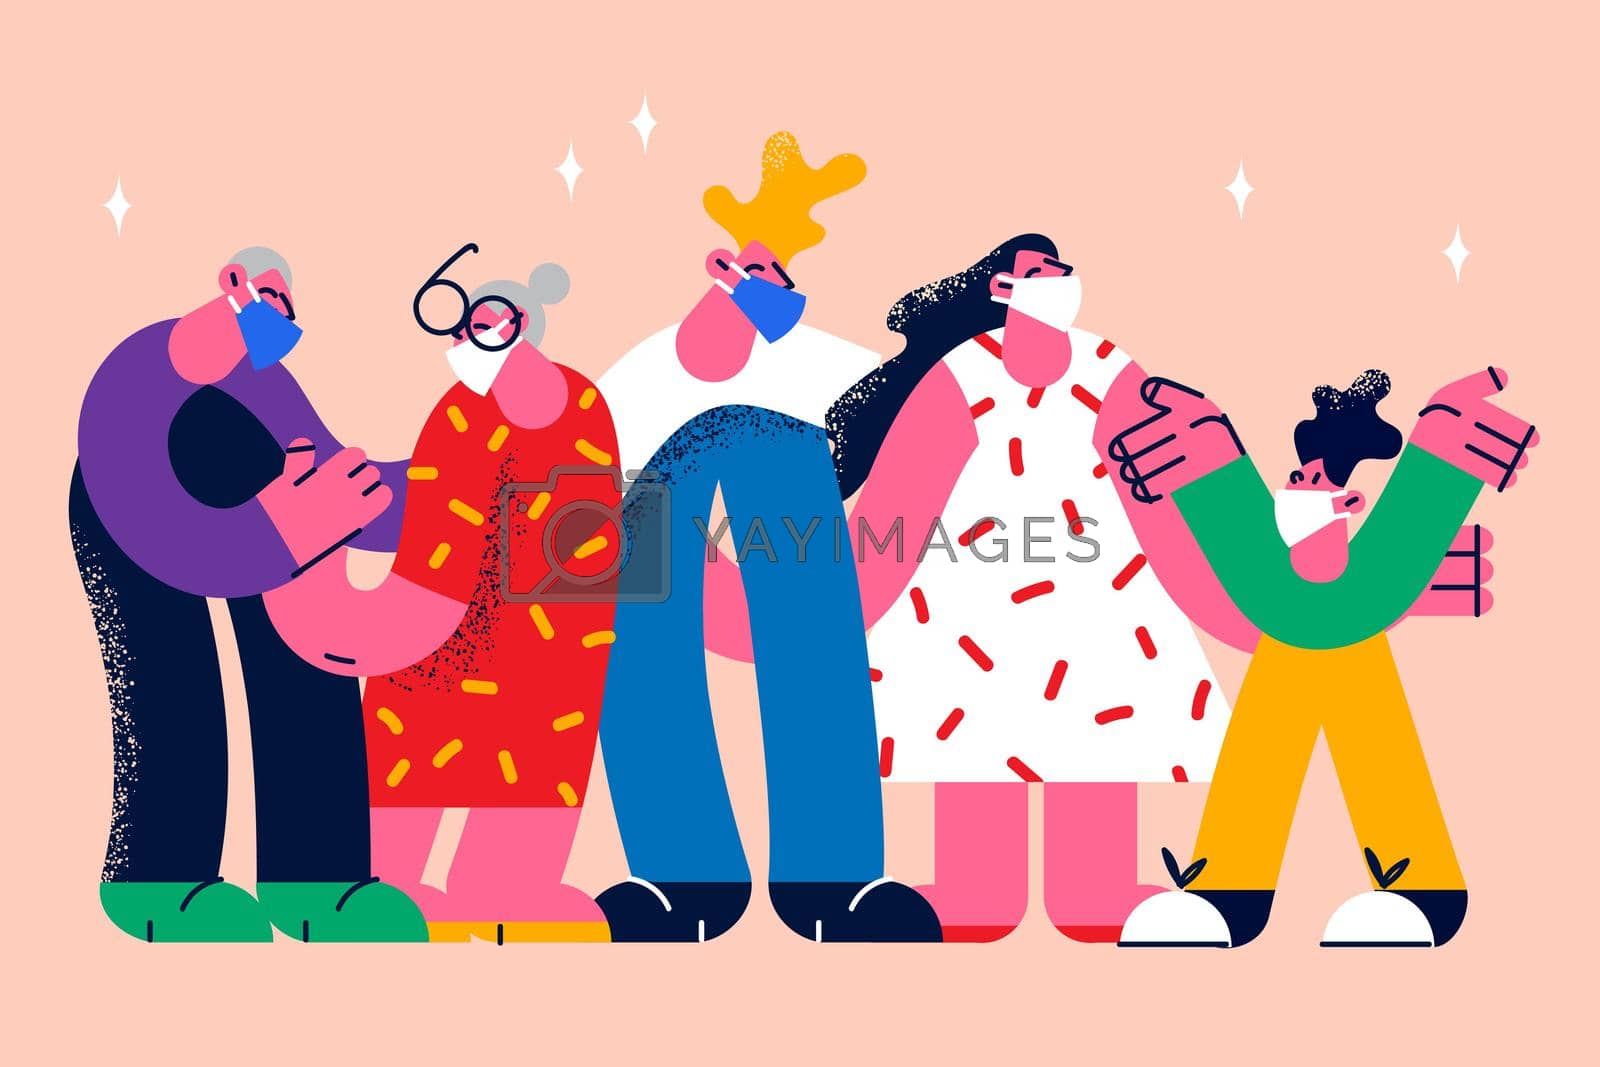 People Wearing protective medical masks covid-19 concept. Group of young and old people standing wearing protective medical masks during coronavirus epidemic times vector illustration